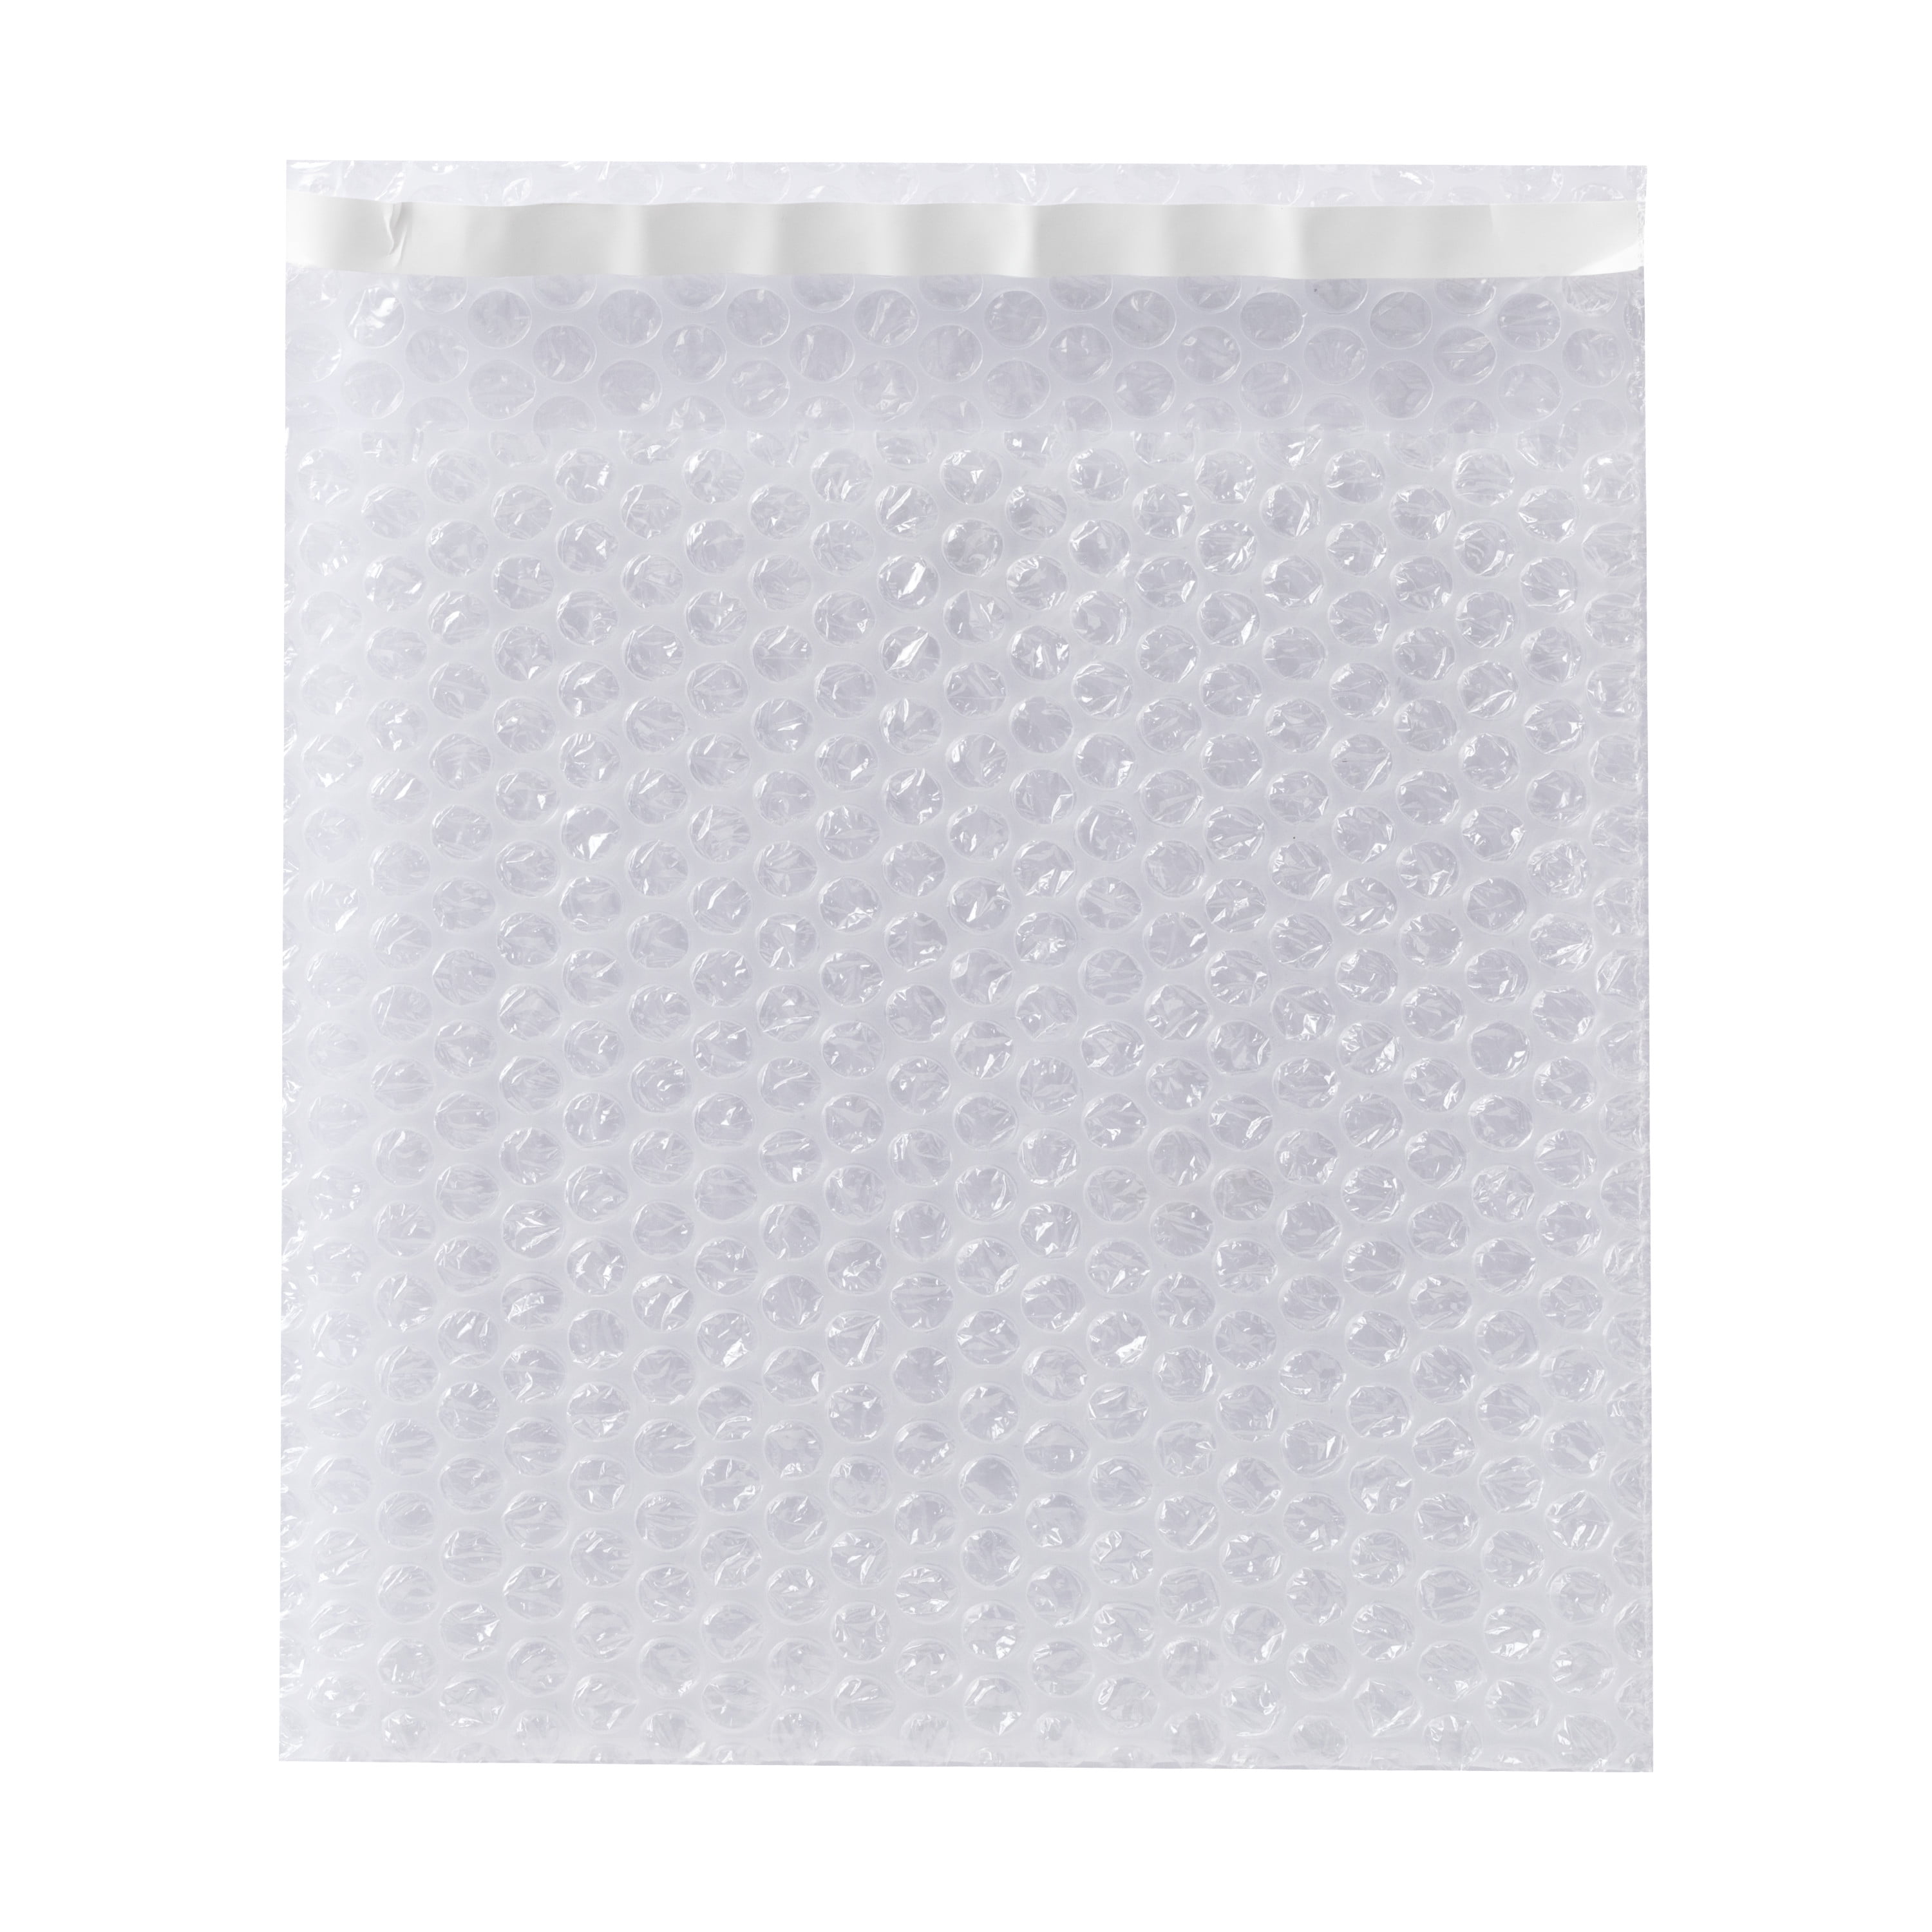 Duck Brand Bubble Pouches on a Roll, 7.5 in. x 7.5 in., Clear, 20 Pack  (285741) 